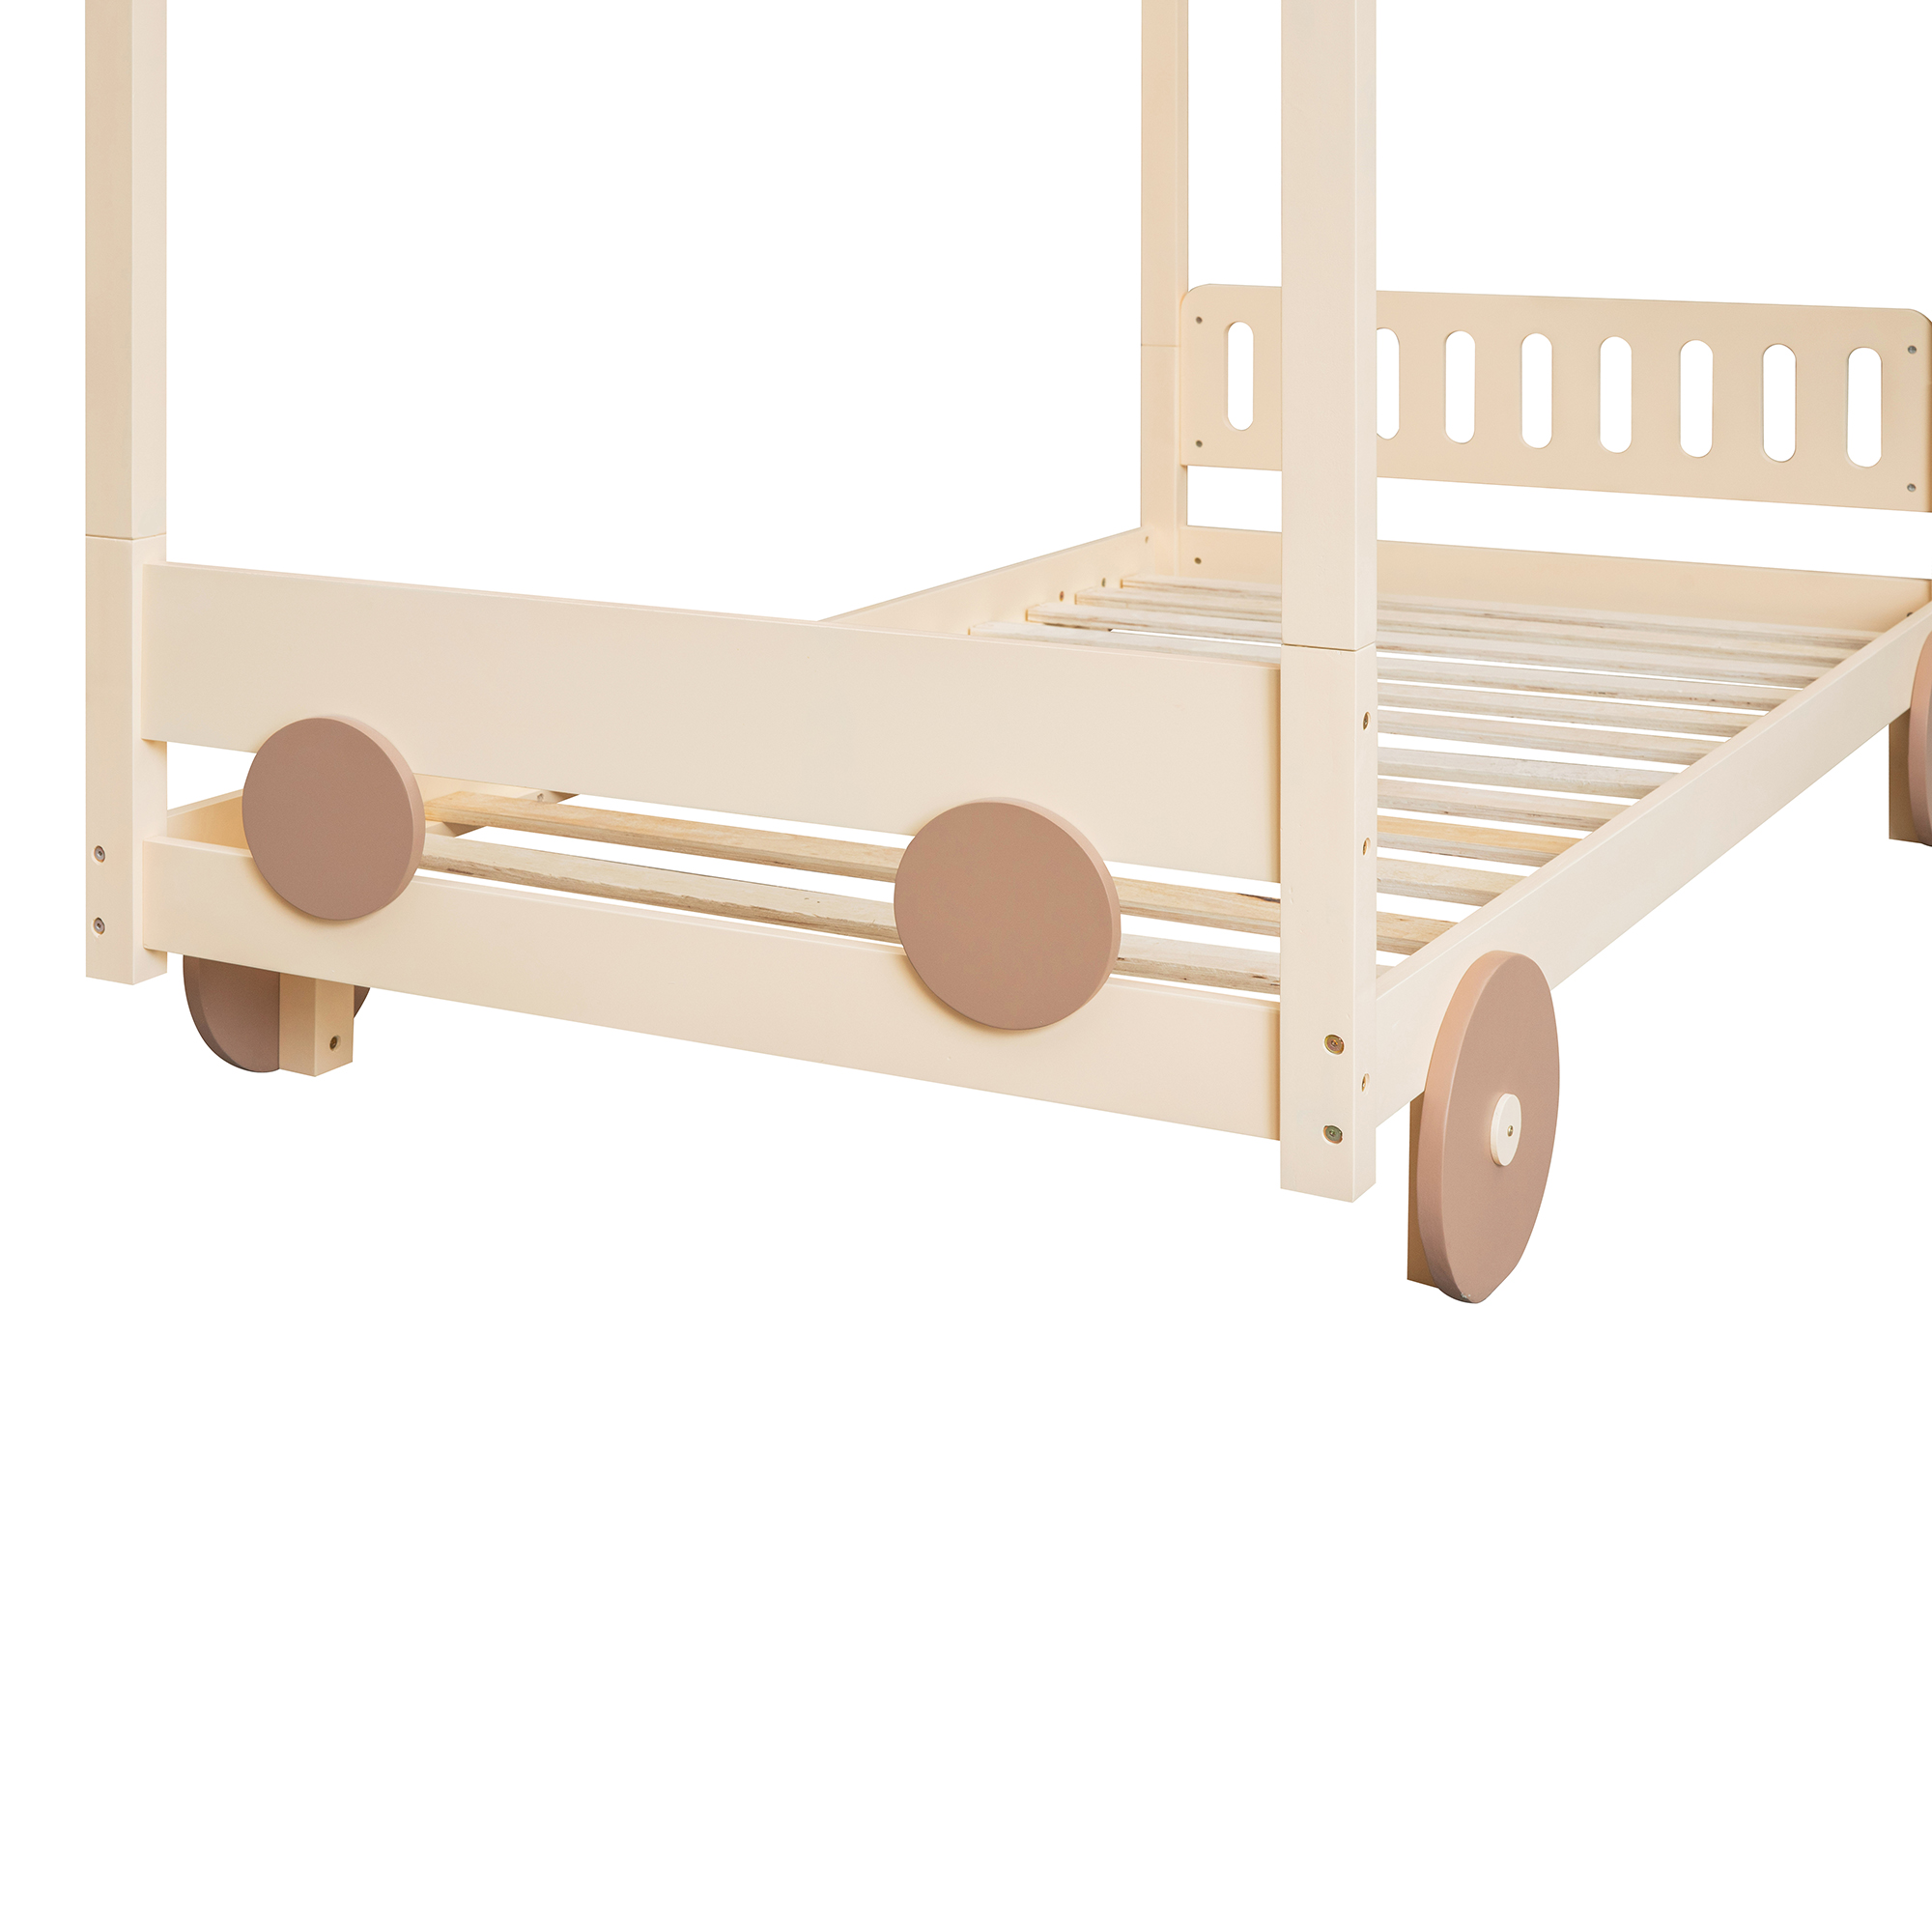 Artlia Twin Size Canopy Car-Shaped Platform Bed,Natural+Brown - image 3 of 7